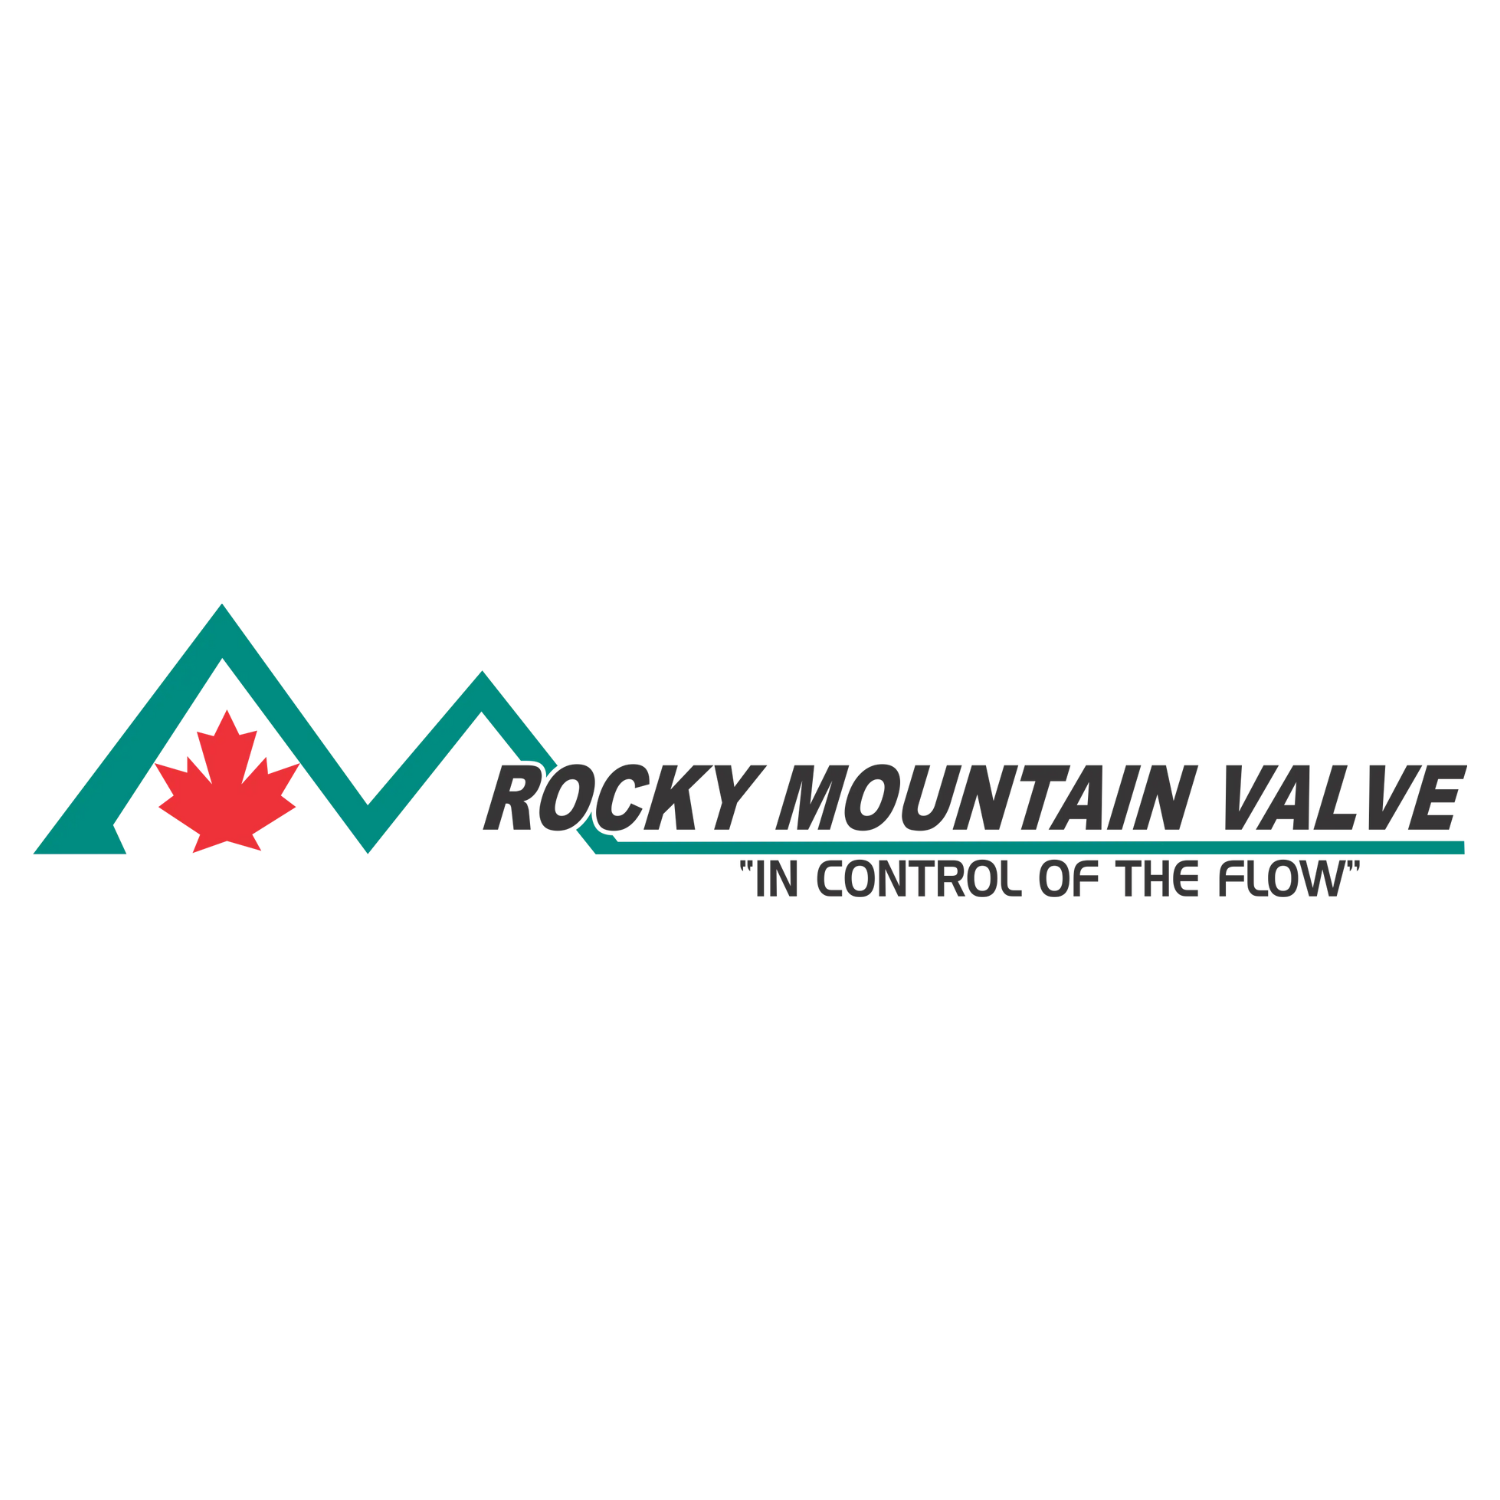 ROCKY MOUNTAIN VALVE FOR WEBSITE.png